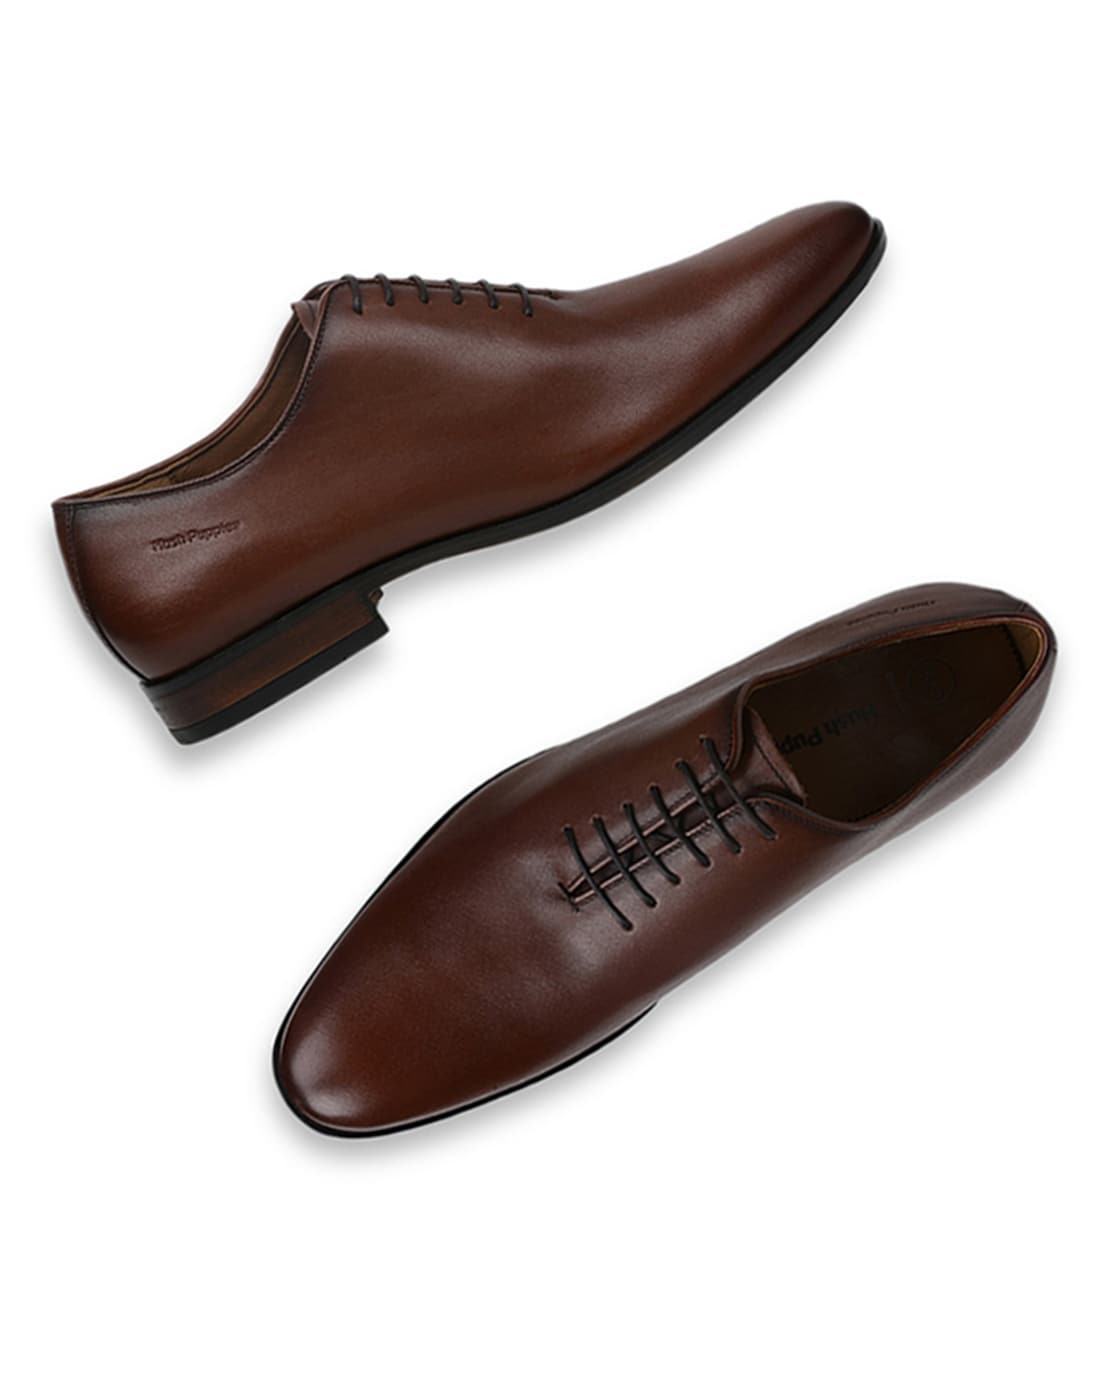 Buy Hush Puppies Men's Black Leather Formal Shoes - 8 UK/India (42  EU)(854-6966) at Amazon.in